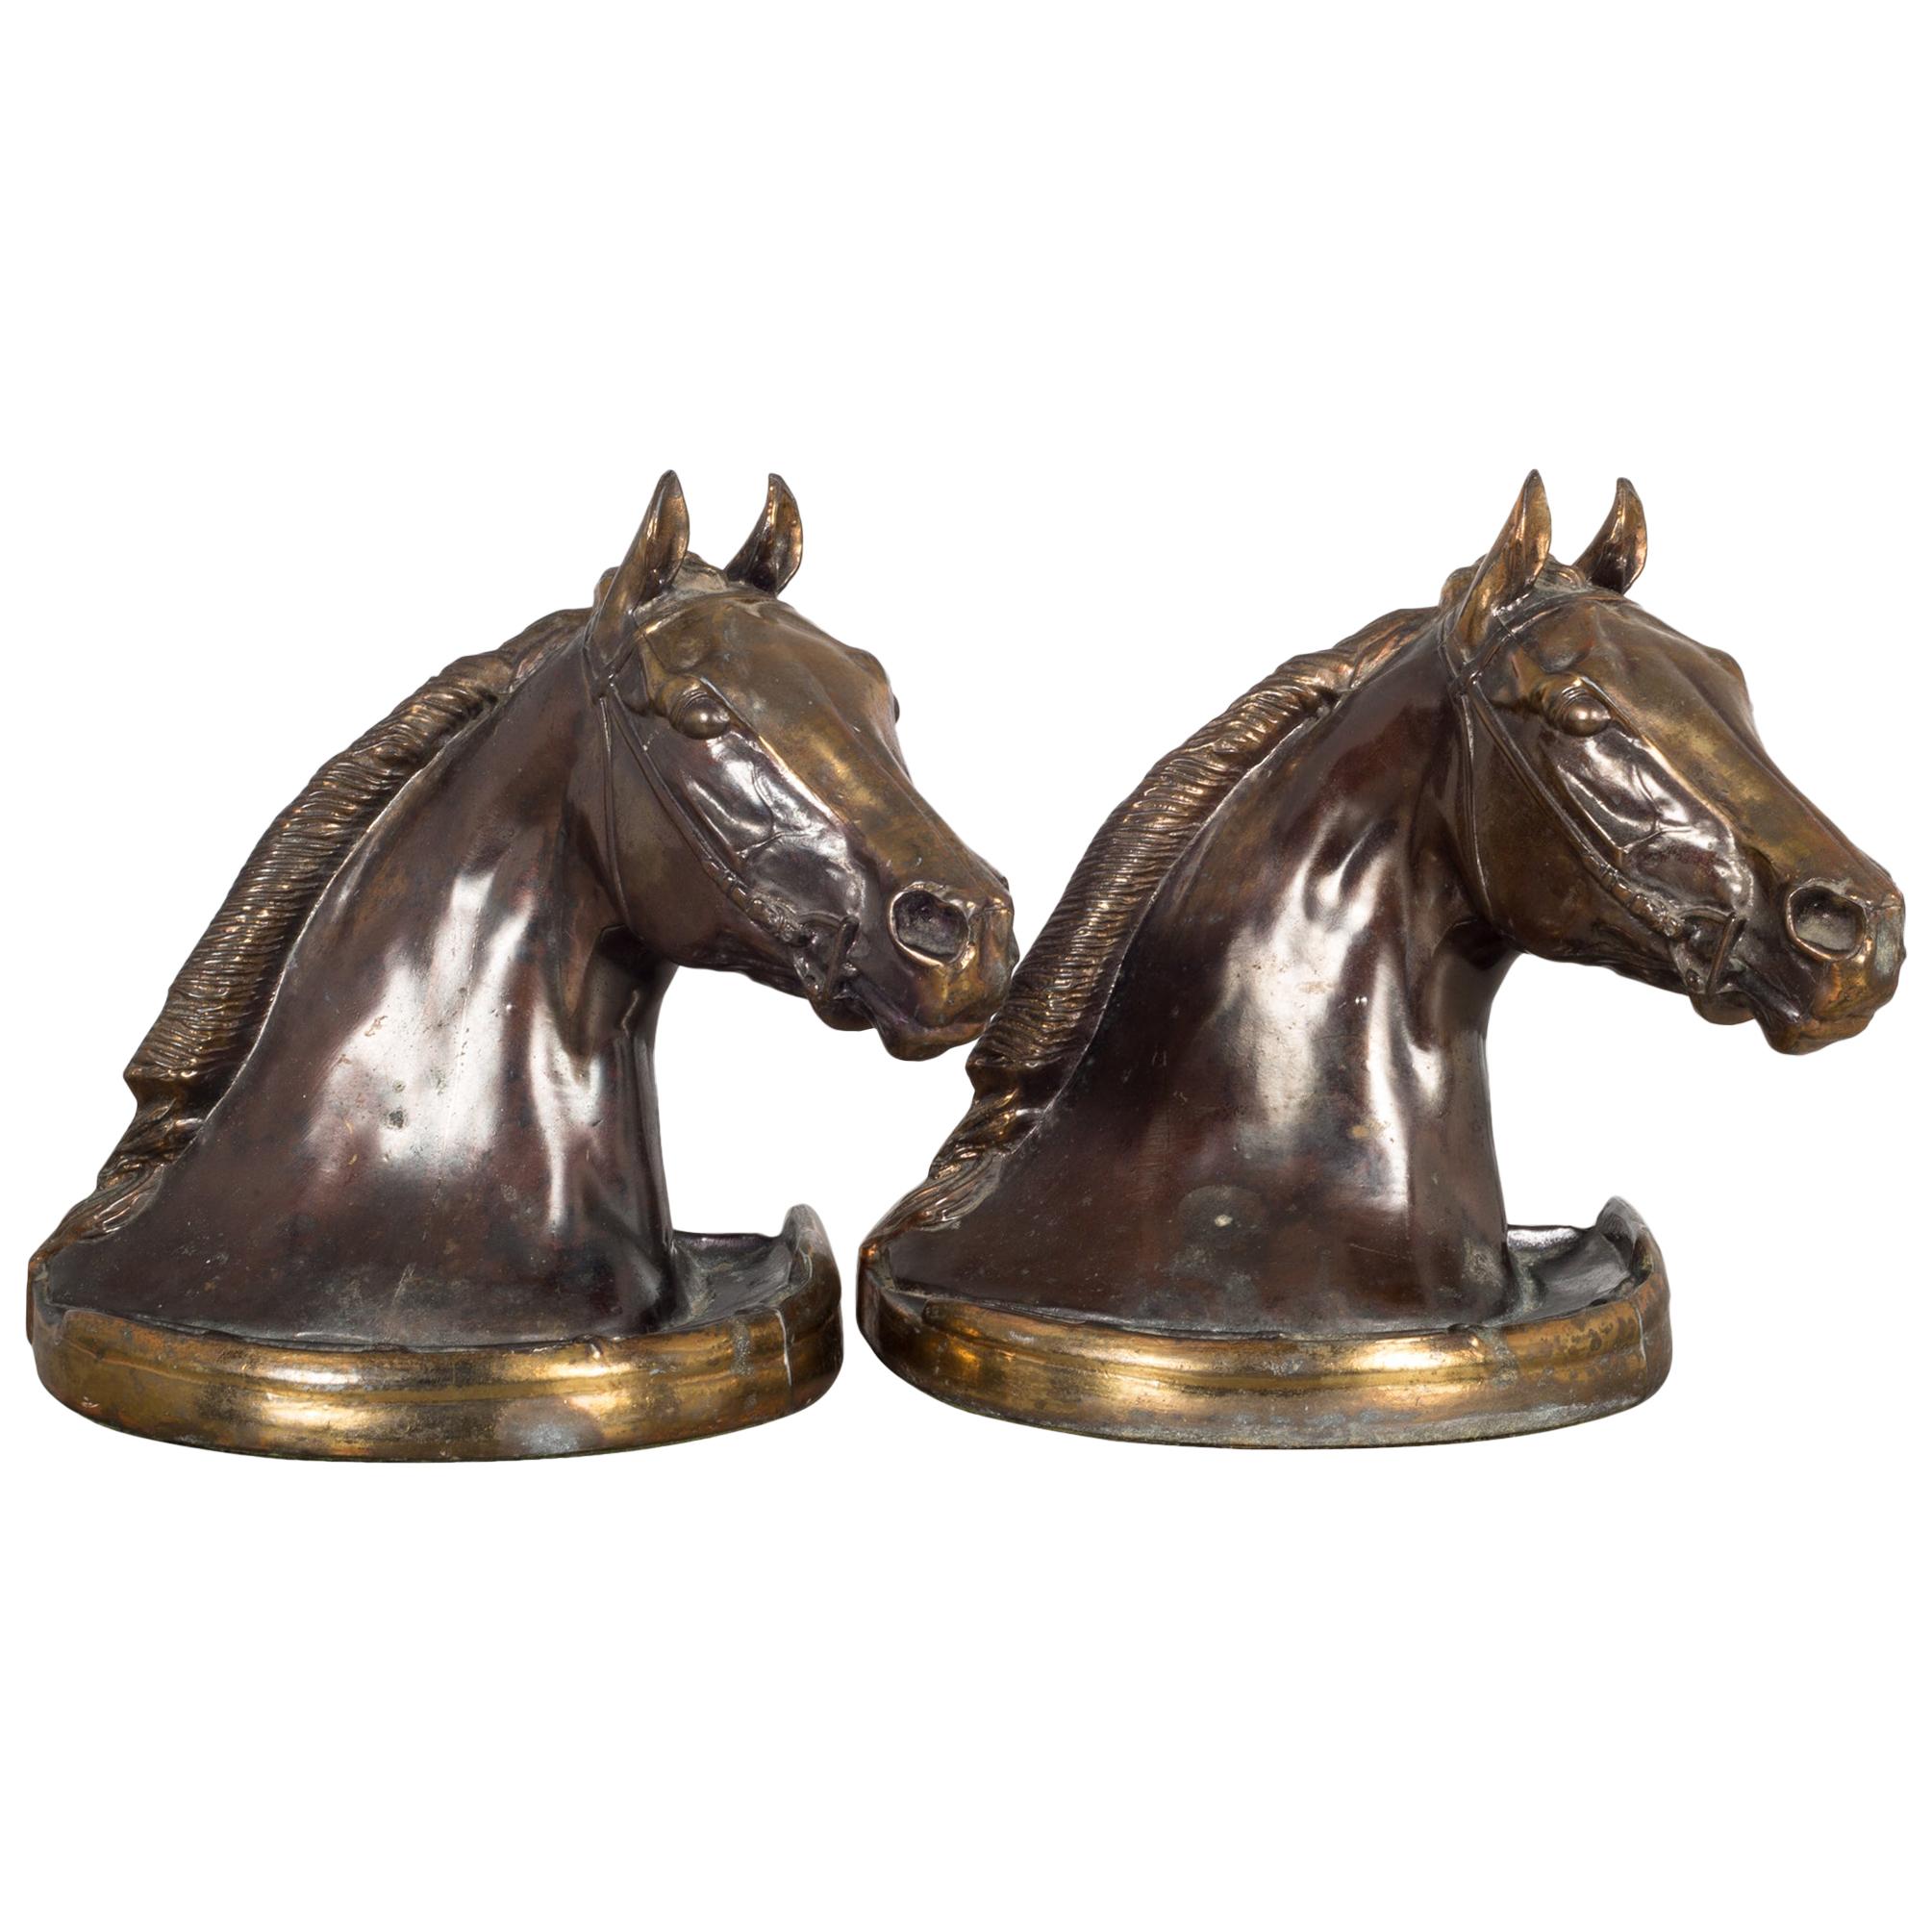 Bronze Plated Horse Head Bookends by Glady's Brown and Dodge circa 1930